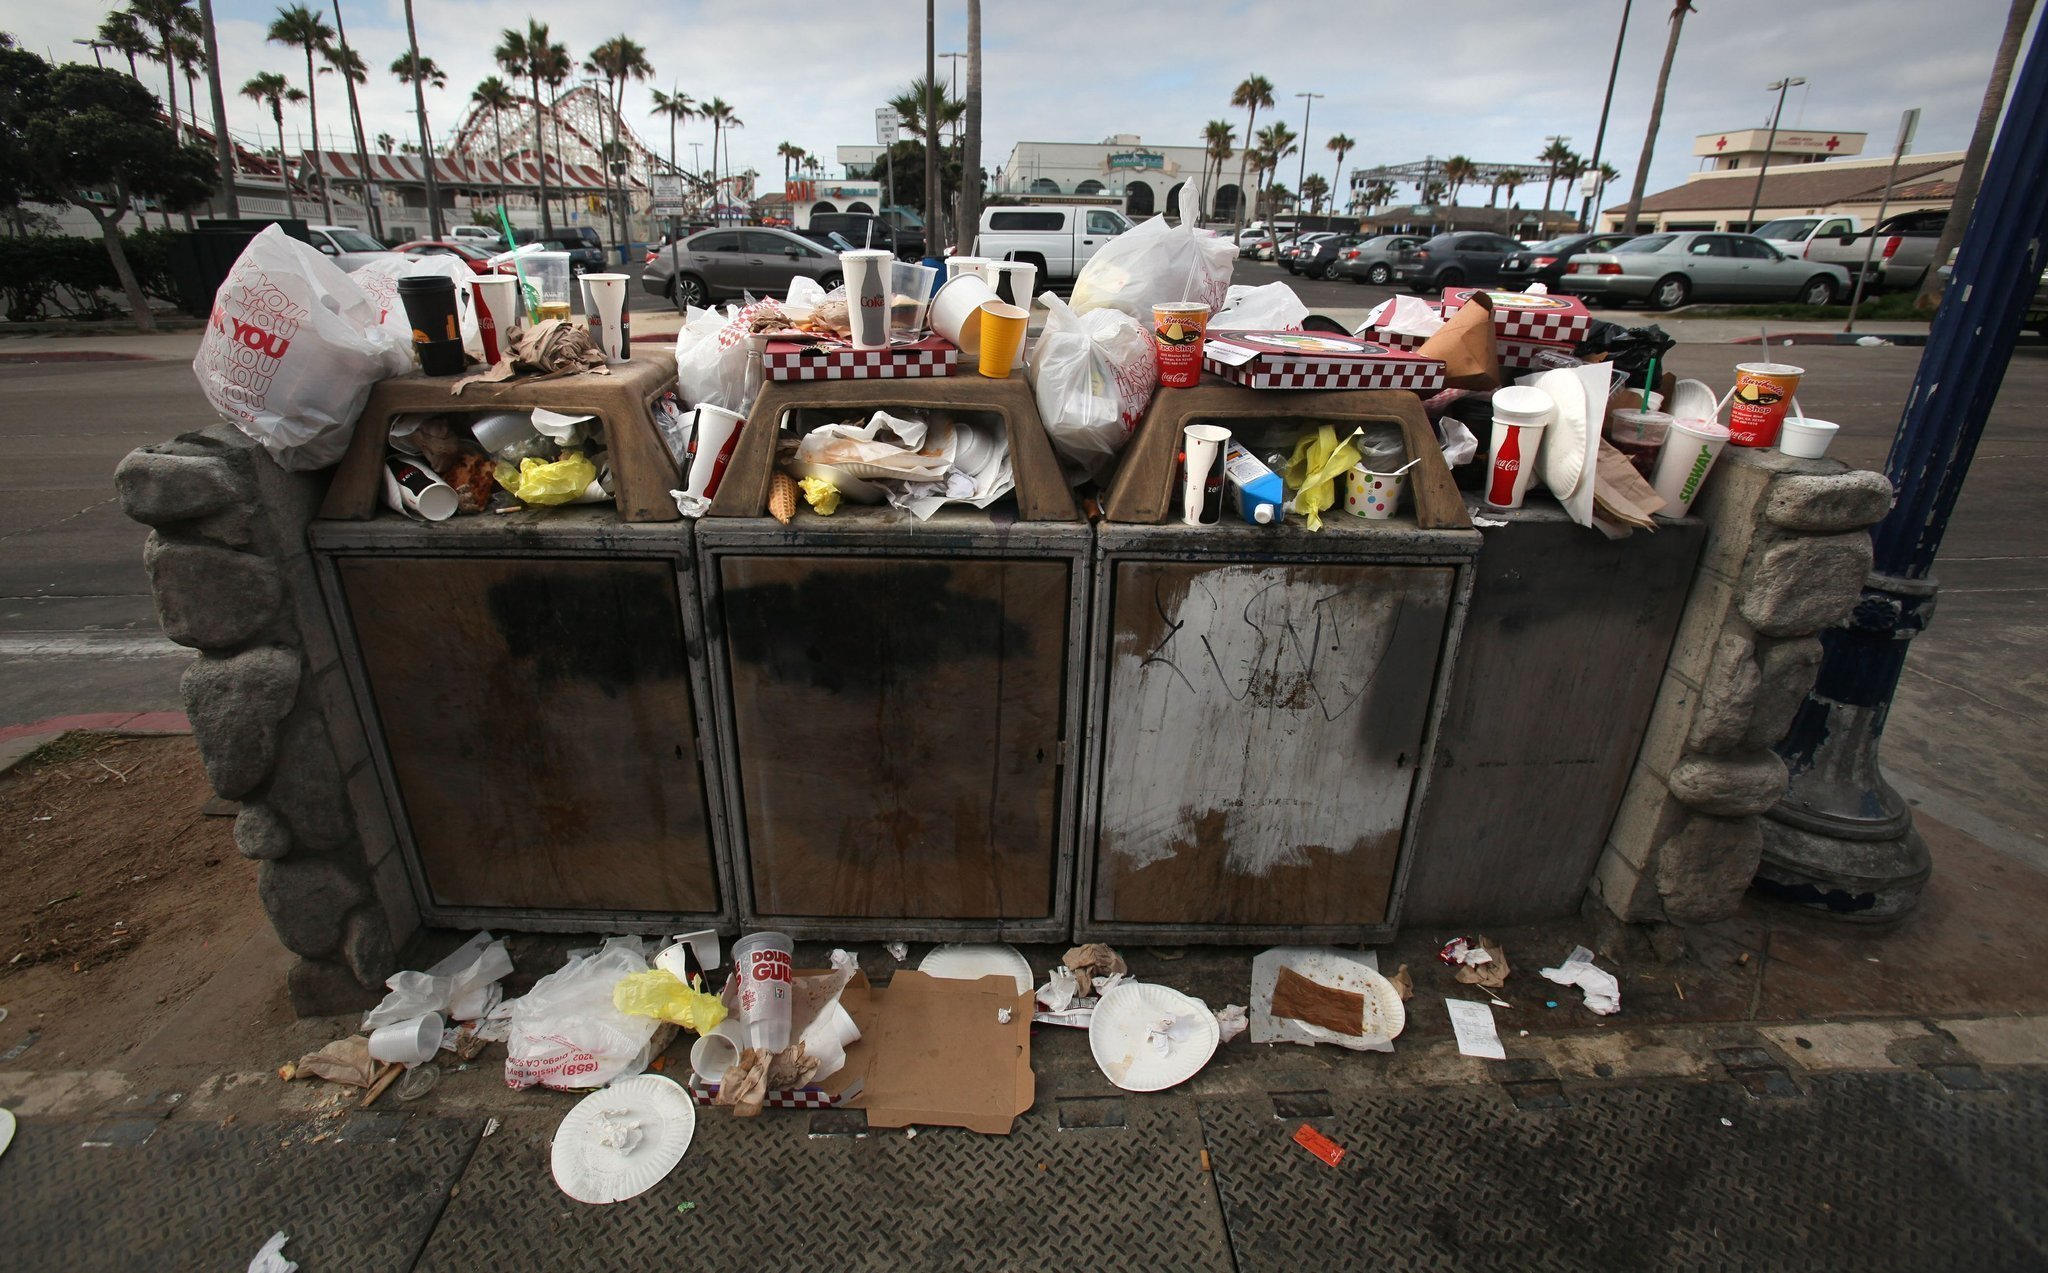 San Diego approves plastic bag ban City votes to